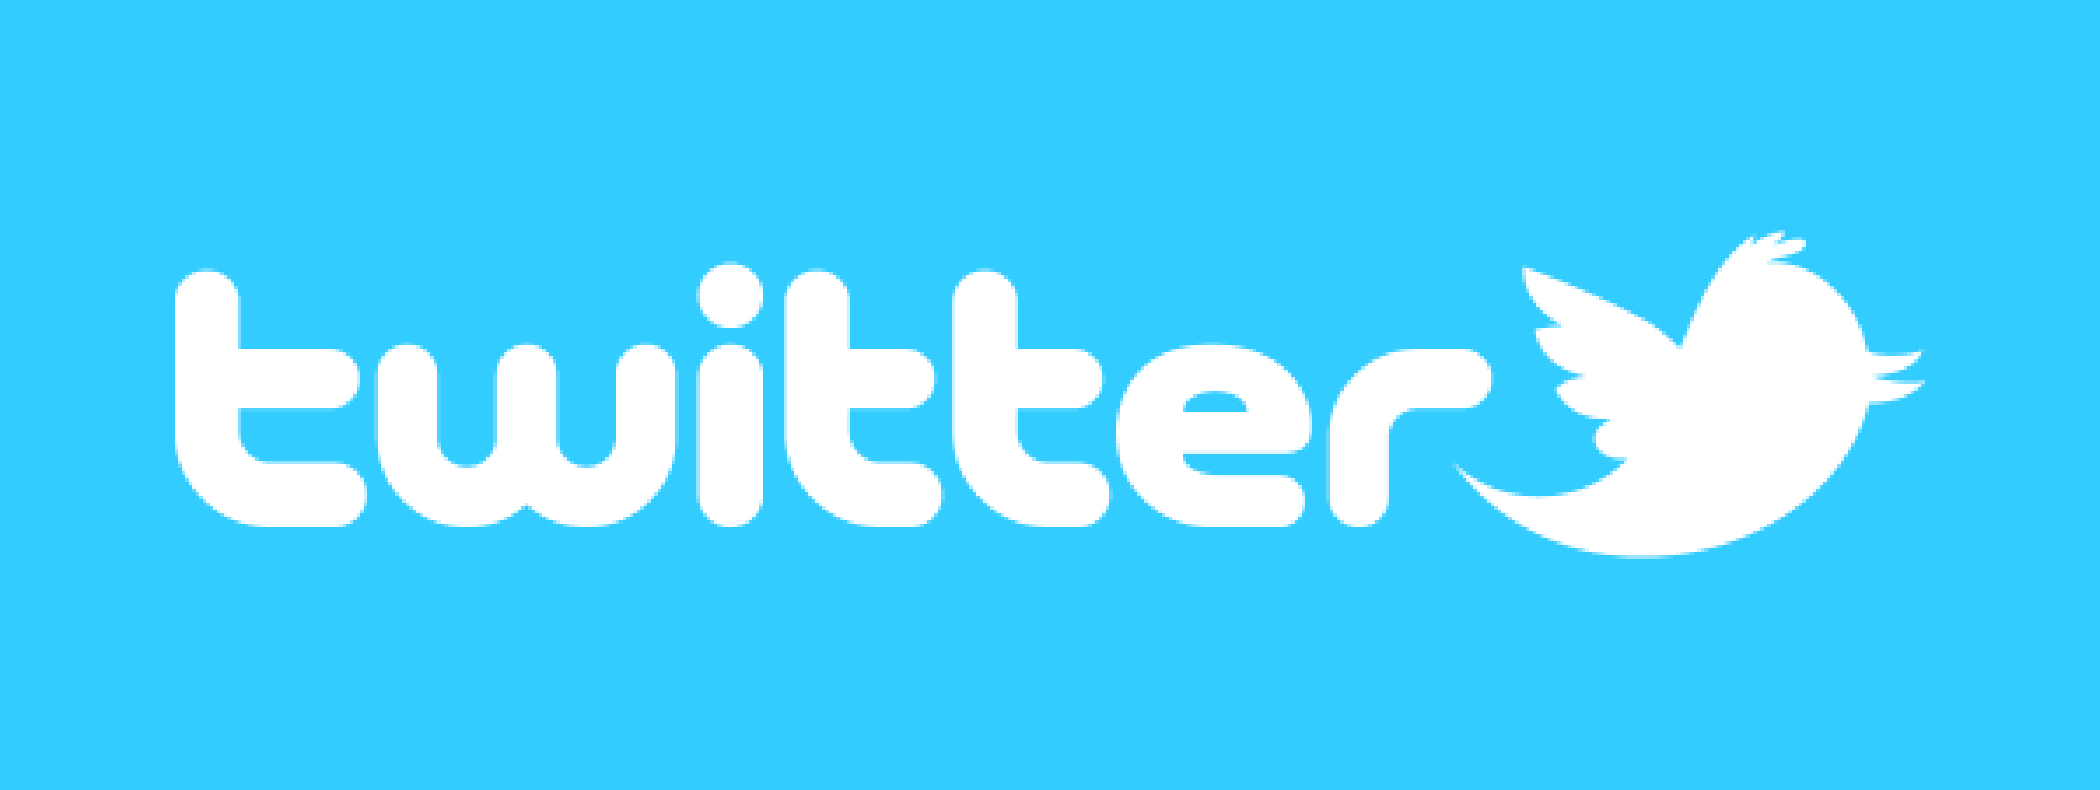 Official Twitter Logo - Twitter Now Pushing Random Tweets into Your Feed | eTeknix